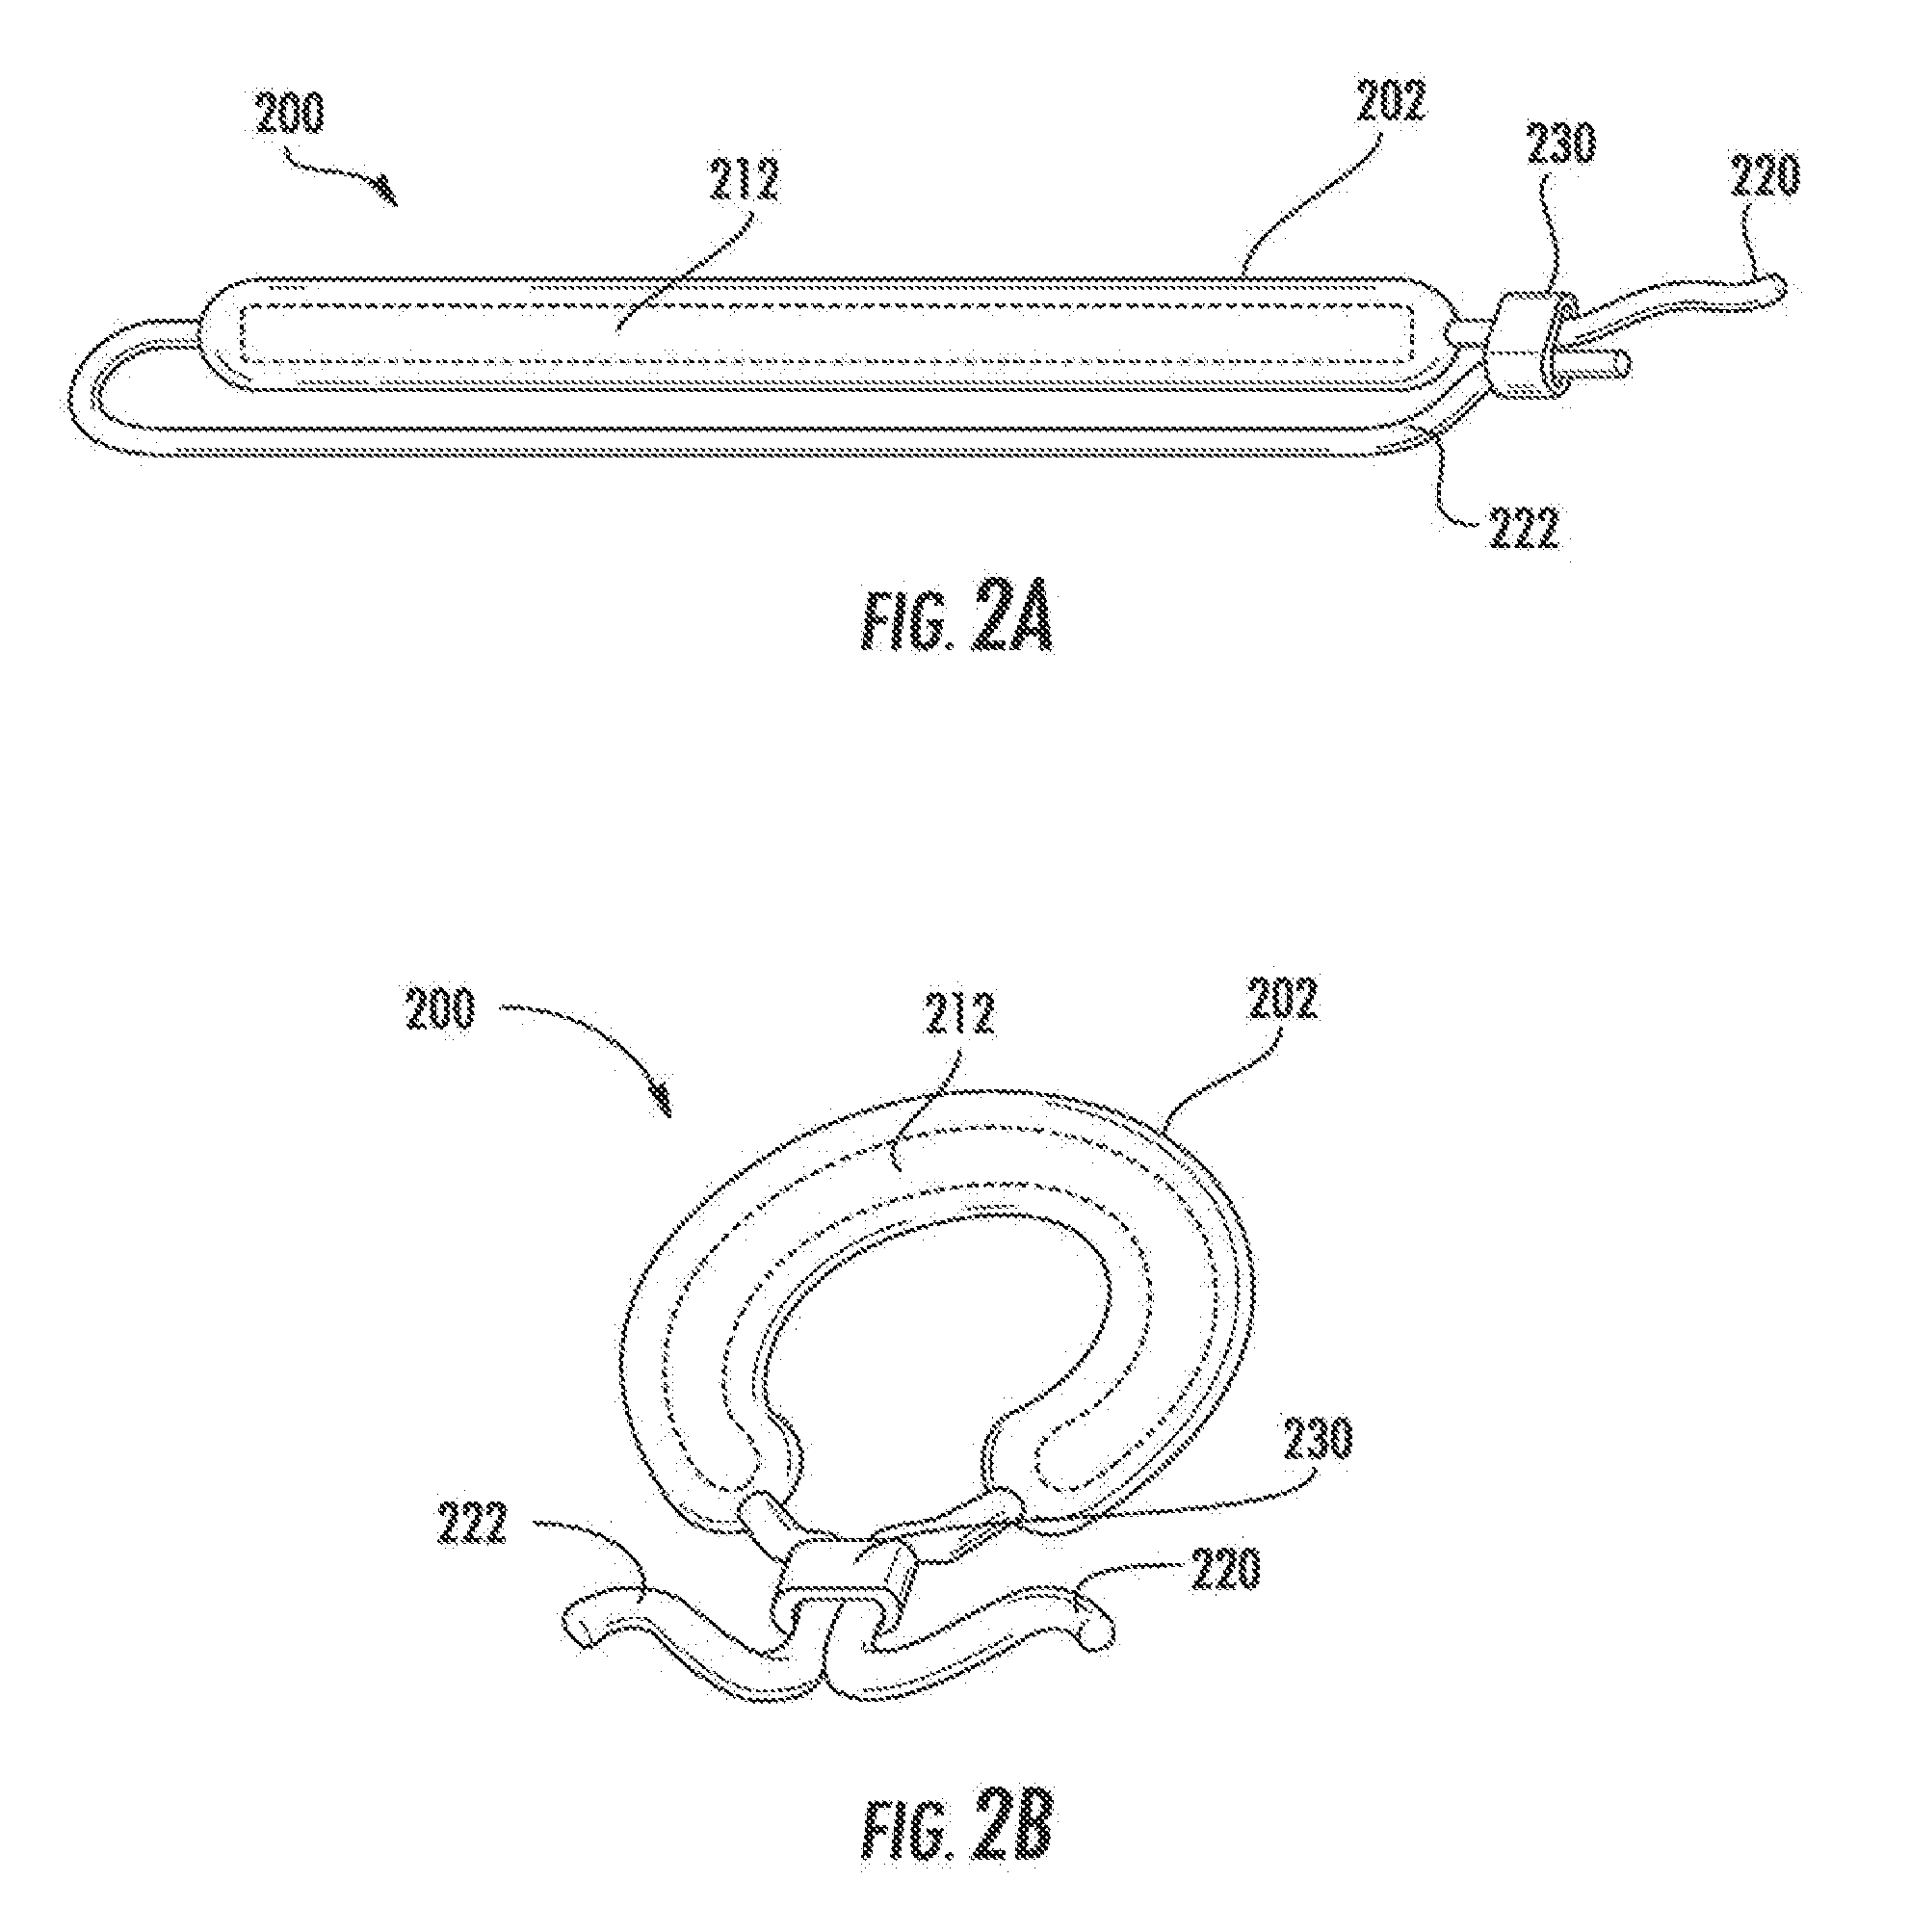 Drug delivery systems and methods for treatment of bladder cancer